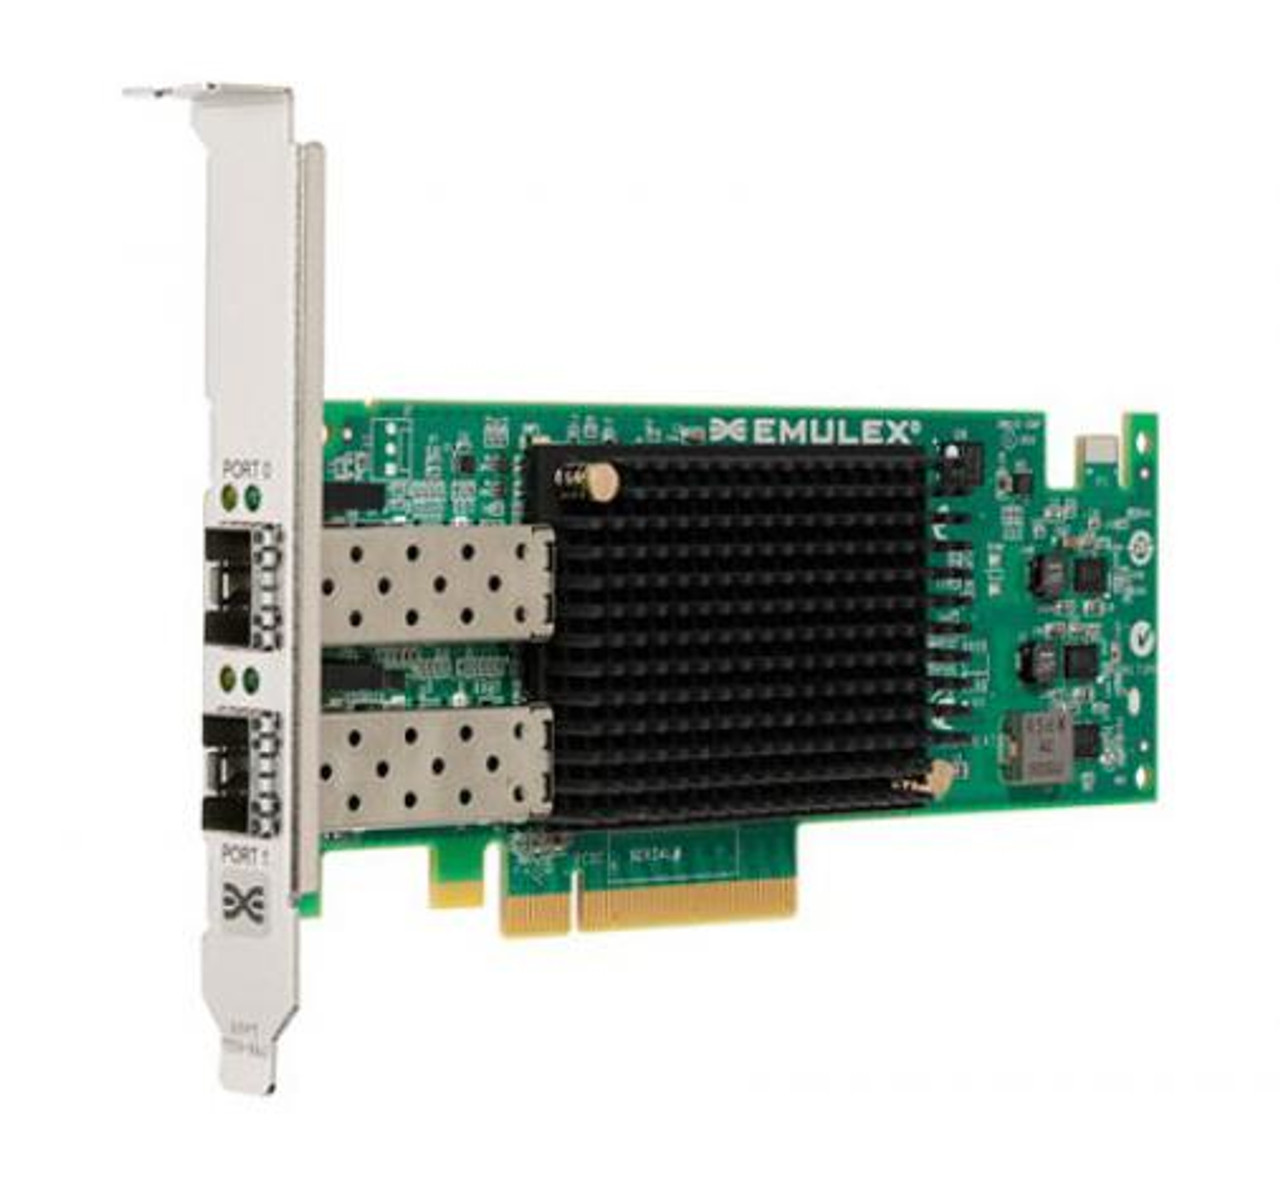 49Y7950B106 IBM Dual-Ports 10Gbps Gigabit Ethernet PCI Express 2.0 x8 Virtual Fabric Network Adapter II by Emulex for System x